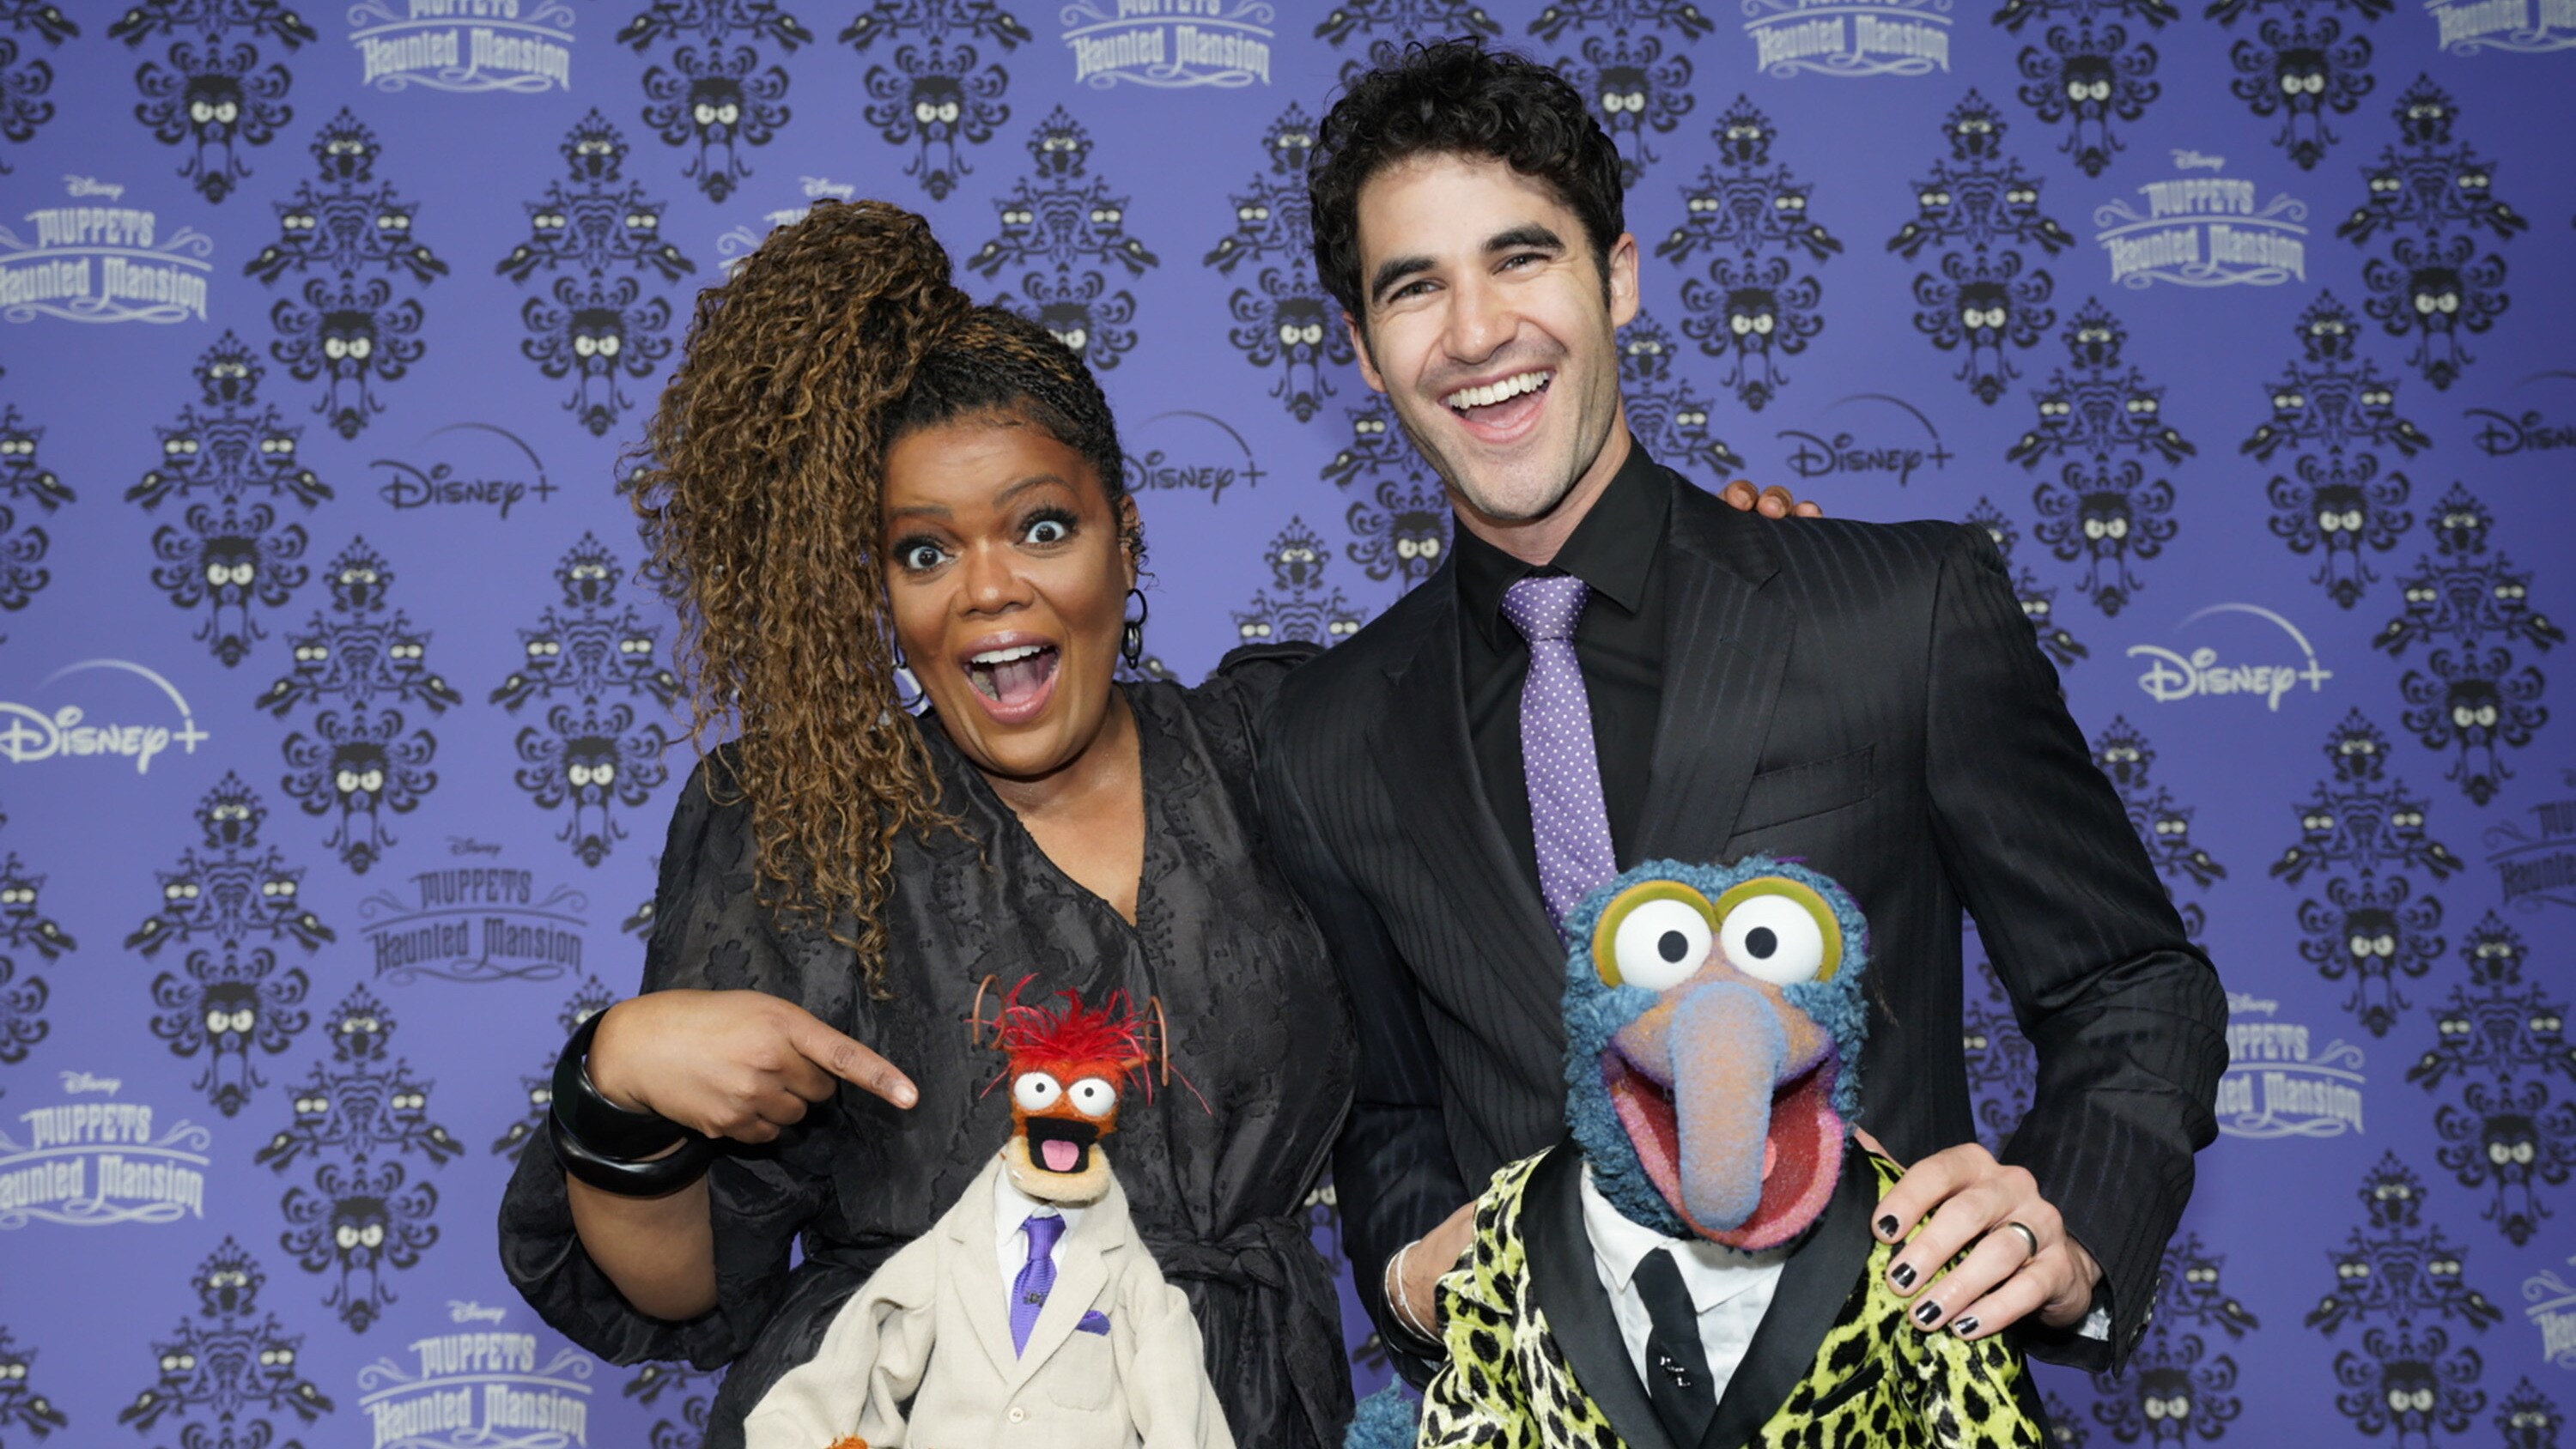 MUPPETS HAUNTED MANSION - Stars of The Muppets first-ever Halloween special "Muppets Haunted Mansion" attended the Drive-In Premiere Event at West Los Angeles College, Thursday, October 7. "Muppets Haunted Mansion" is available to stream Friday, October 8 on Disney+. (Disney/Jacqueline Jones) YVETTE NICOLE BROWN, PEPE THE KING PRAWN, DARREN CRISS, GONZO